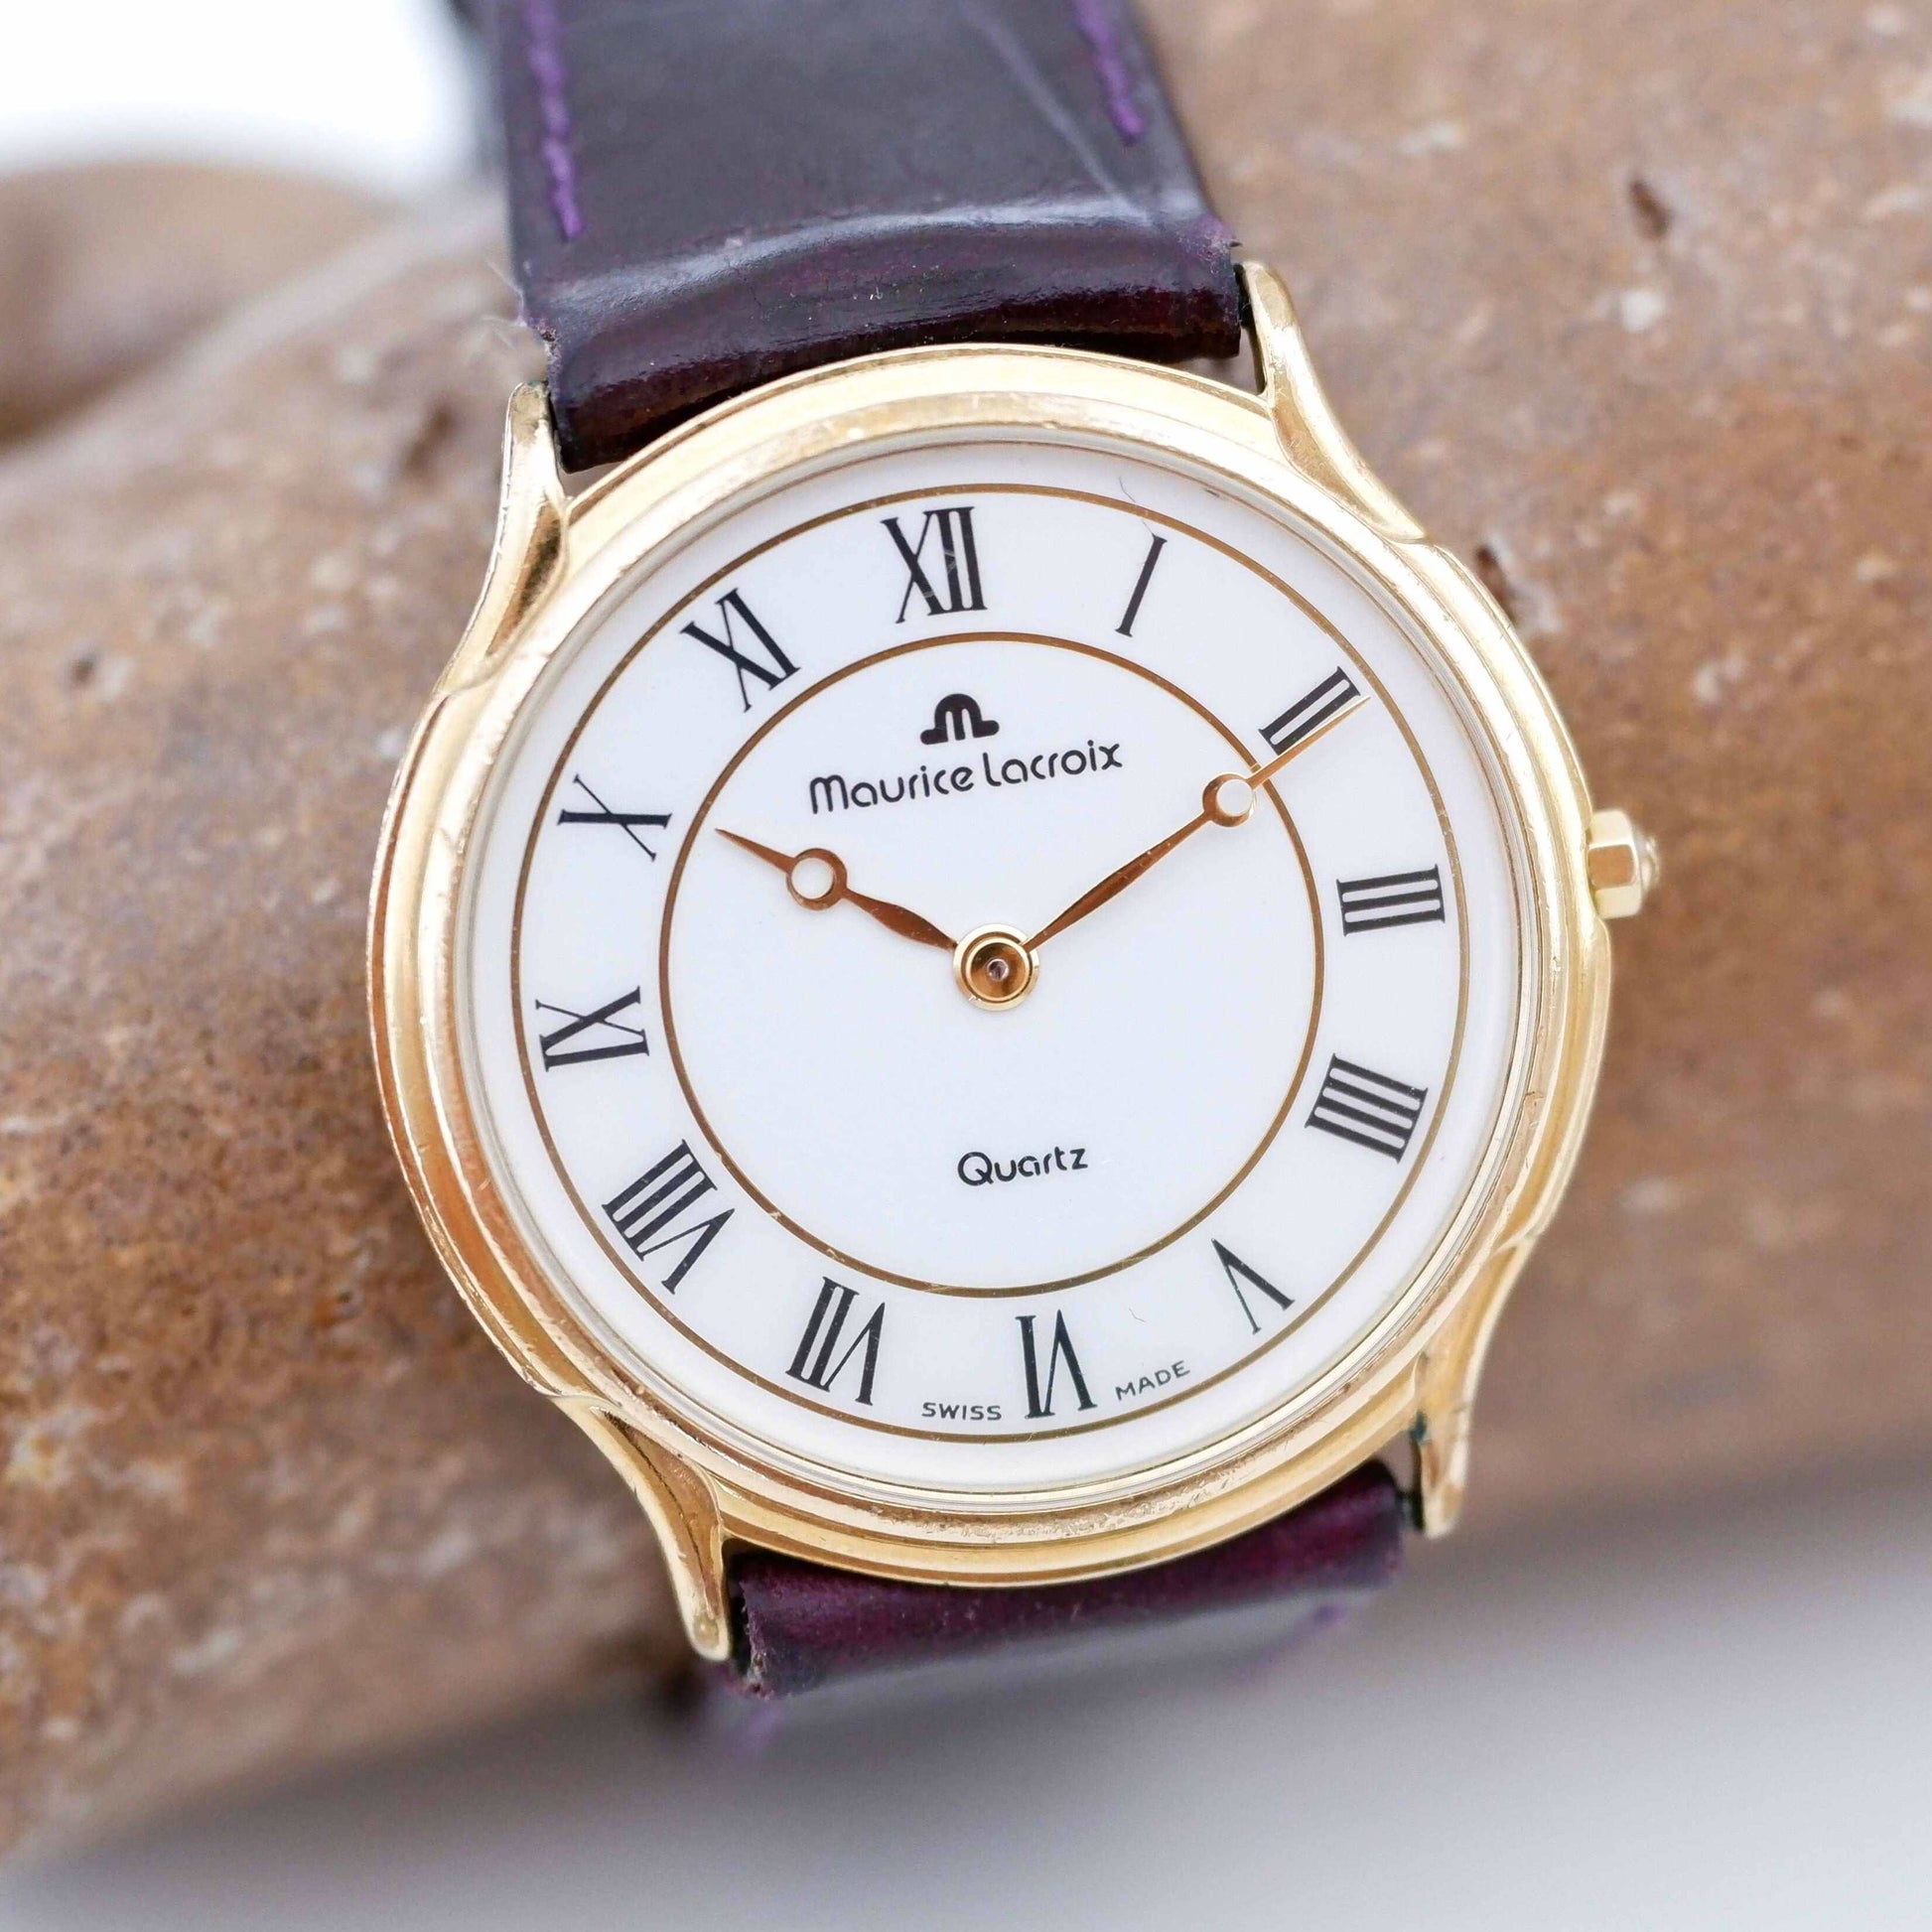 Maurice Lacroix Vintage Ladies Watch: 90s Golden with Classic Roman Numerals, Second Front Side